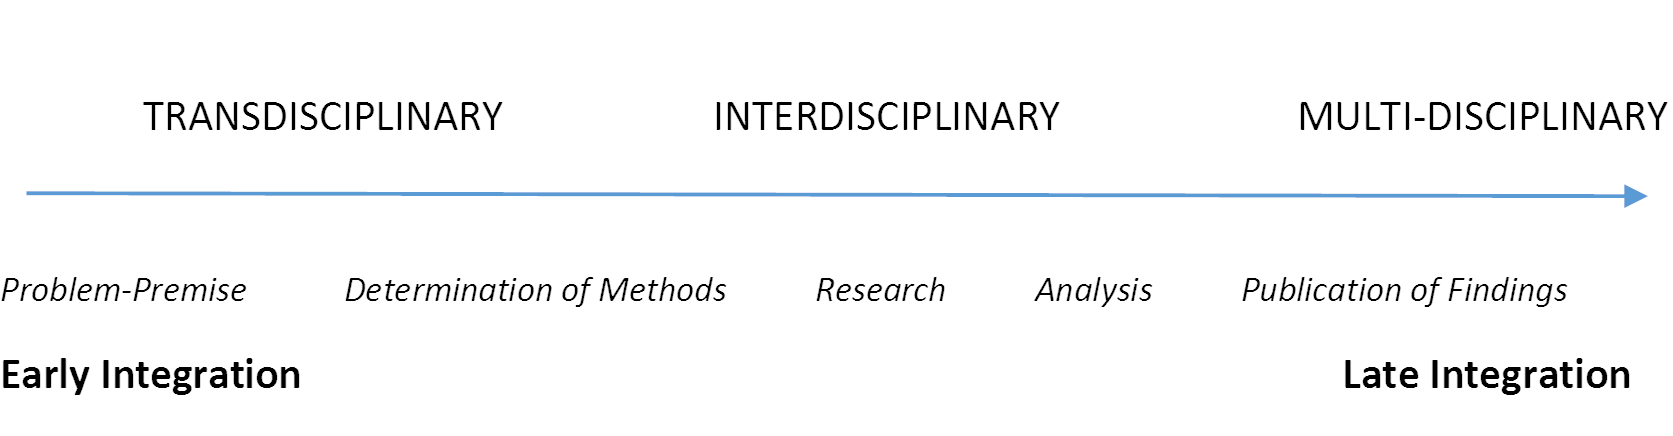 Figure one depicts an arrow moving from left to right, signaling the development of a collaborative research process. On the far left is the beginning of the research process, which entails establishing a problem premise for the research. The scale progresses from left to the right as collaborators work next on determination of methods, conducting research, analyzing data, and finally publishing findings, which is the far right of the scale. Above the arrow scale, Figure one plots levels of collaboration: multi-, inter-, and trans- disciplinarity. Multi-disciplinary collaboration occurs on the far right of the scale, which signifies that multi-disciplinary collaborations happen in the publication of research or analysis of some data. Inter-disciplinary collaboration occurs in the middle of the scale, which signifies that inter-disciplinary collaboration occurs in the research and analysis stages of a research collaborations. Trans-disciplinary collaborations occurs on the far left of the scale, which signifies that trans-disciplinary collaborations happen at the very beginning of a research collaboration, in the forming of a problem-premise and development of collaborative research methods.